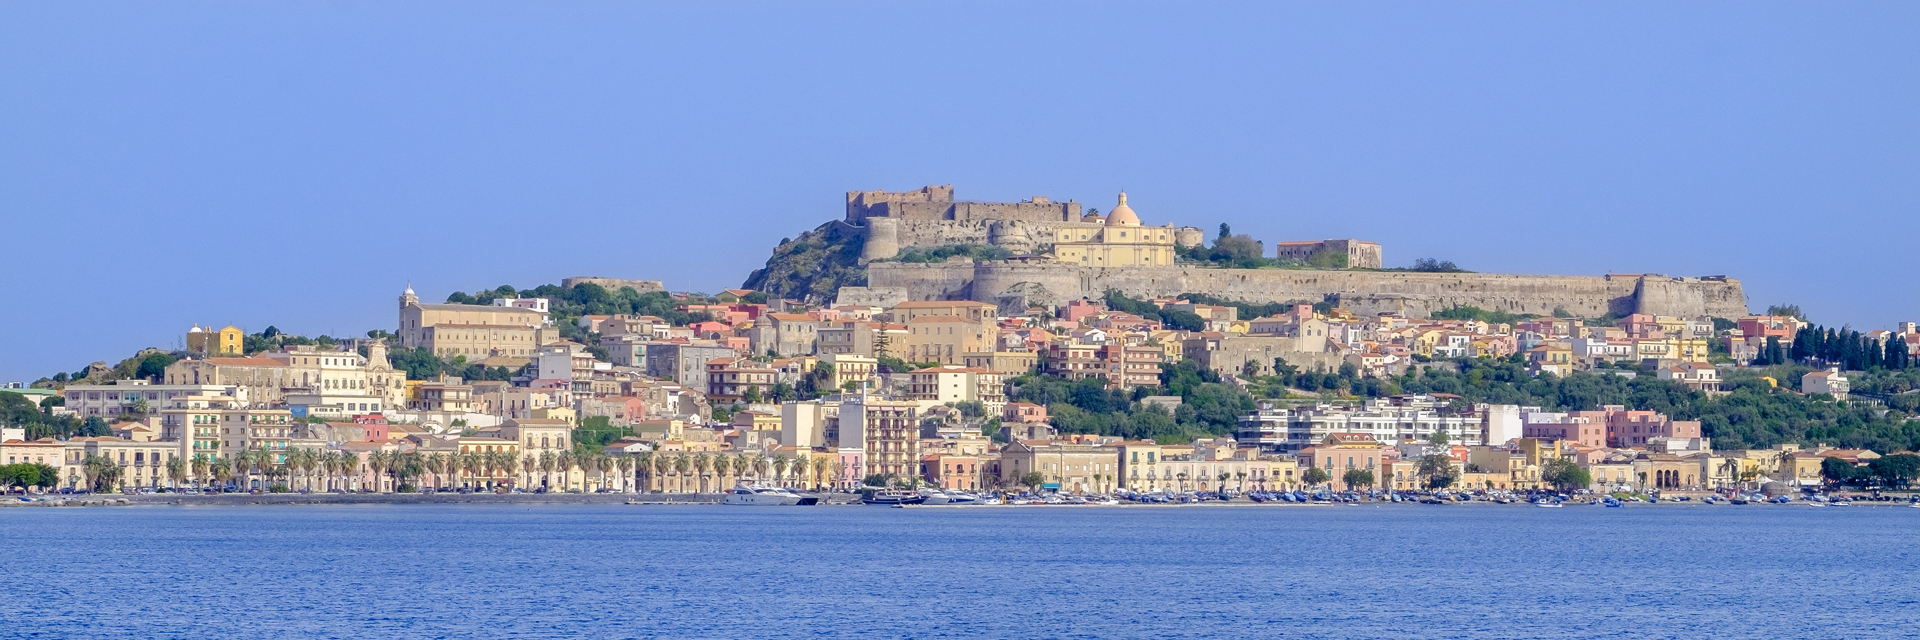 Milazzo seen from the sea (Sicily, Italy)